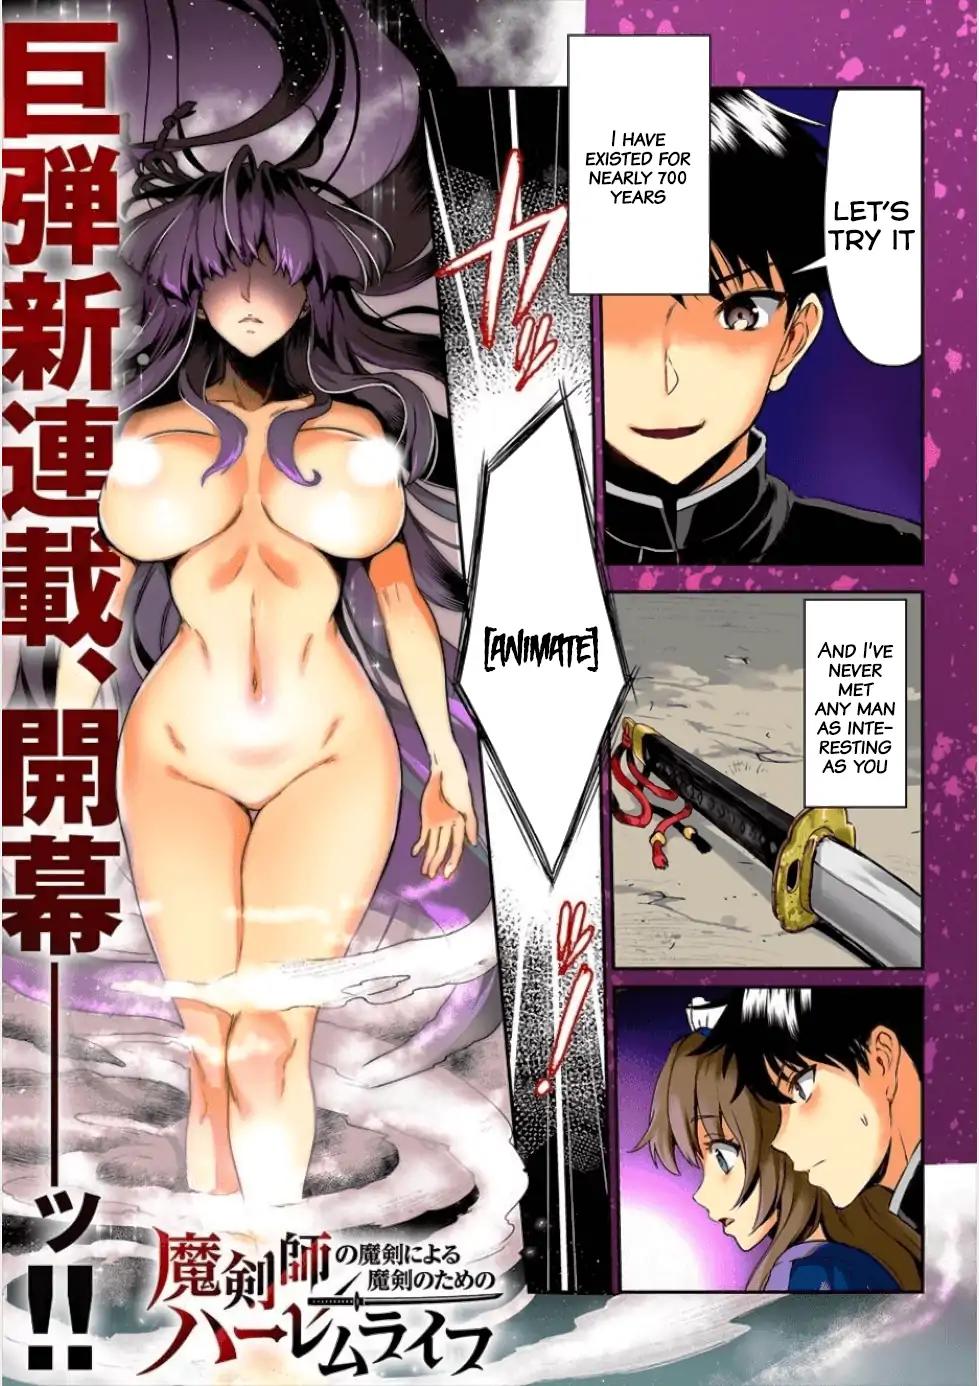 The Cursed Sword Master’s Harem Life: By the Sword, For the Sword, Cursed Sword Master Chapter 1